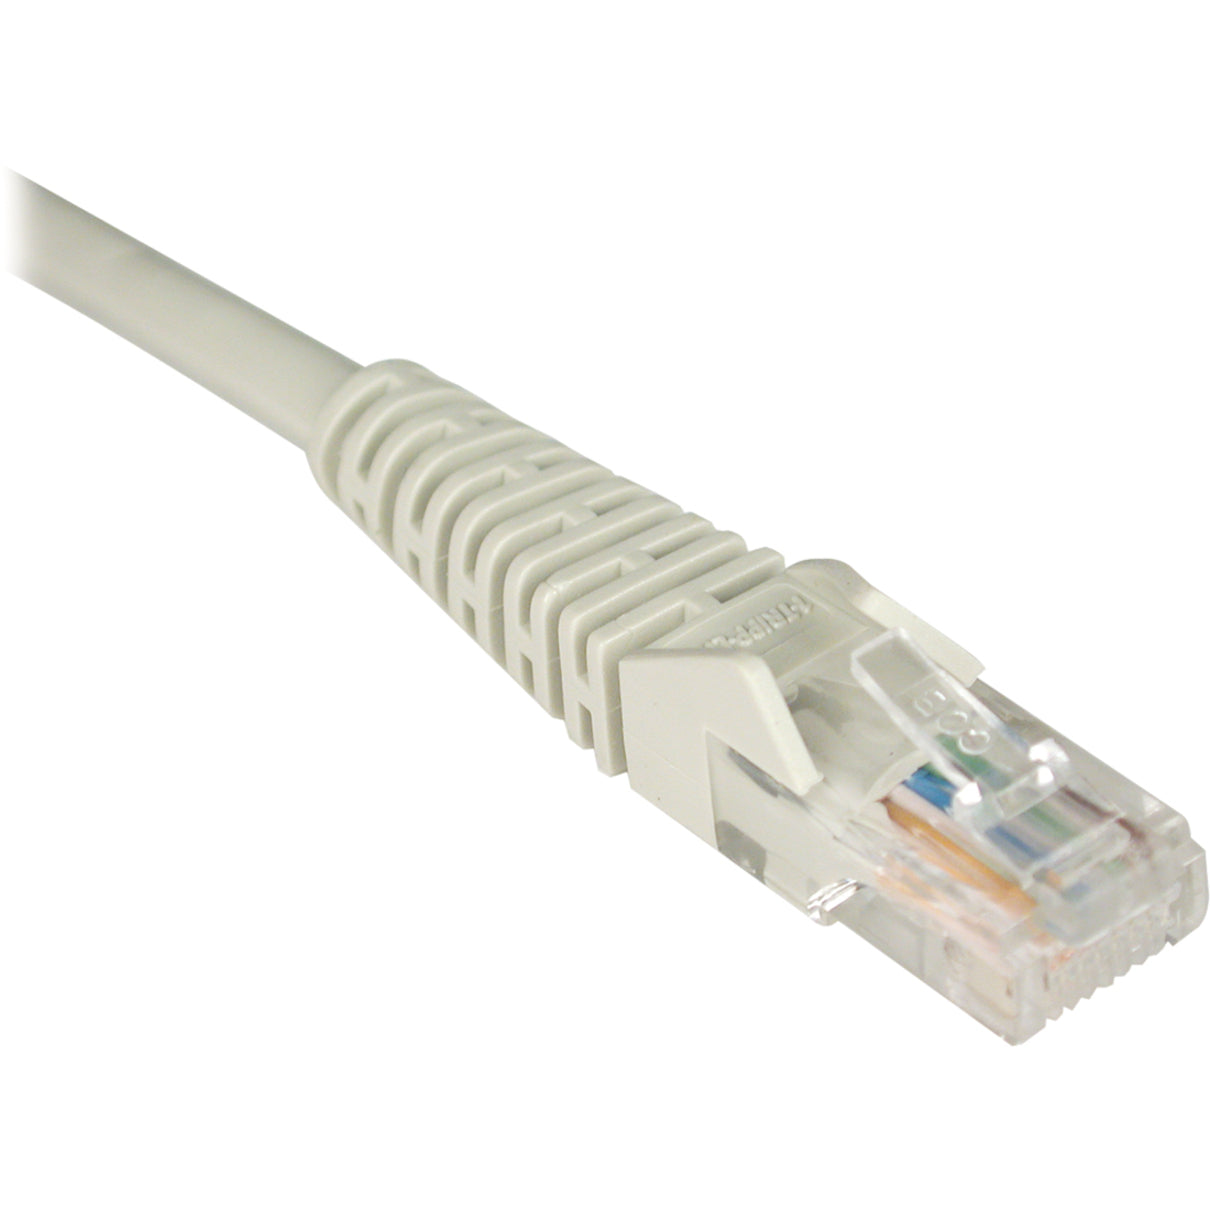 Tripp Lite N001-025-GY Cat5e Network Patch Cable, 25 ft. Gray Snagless